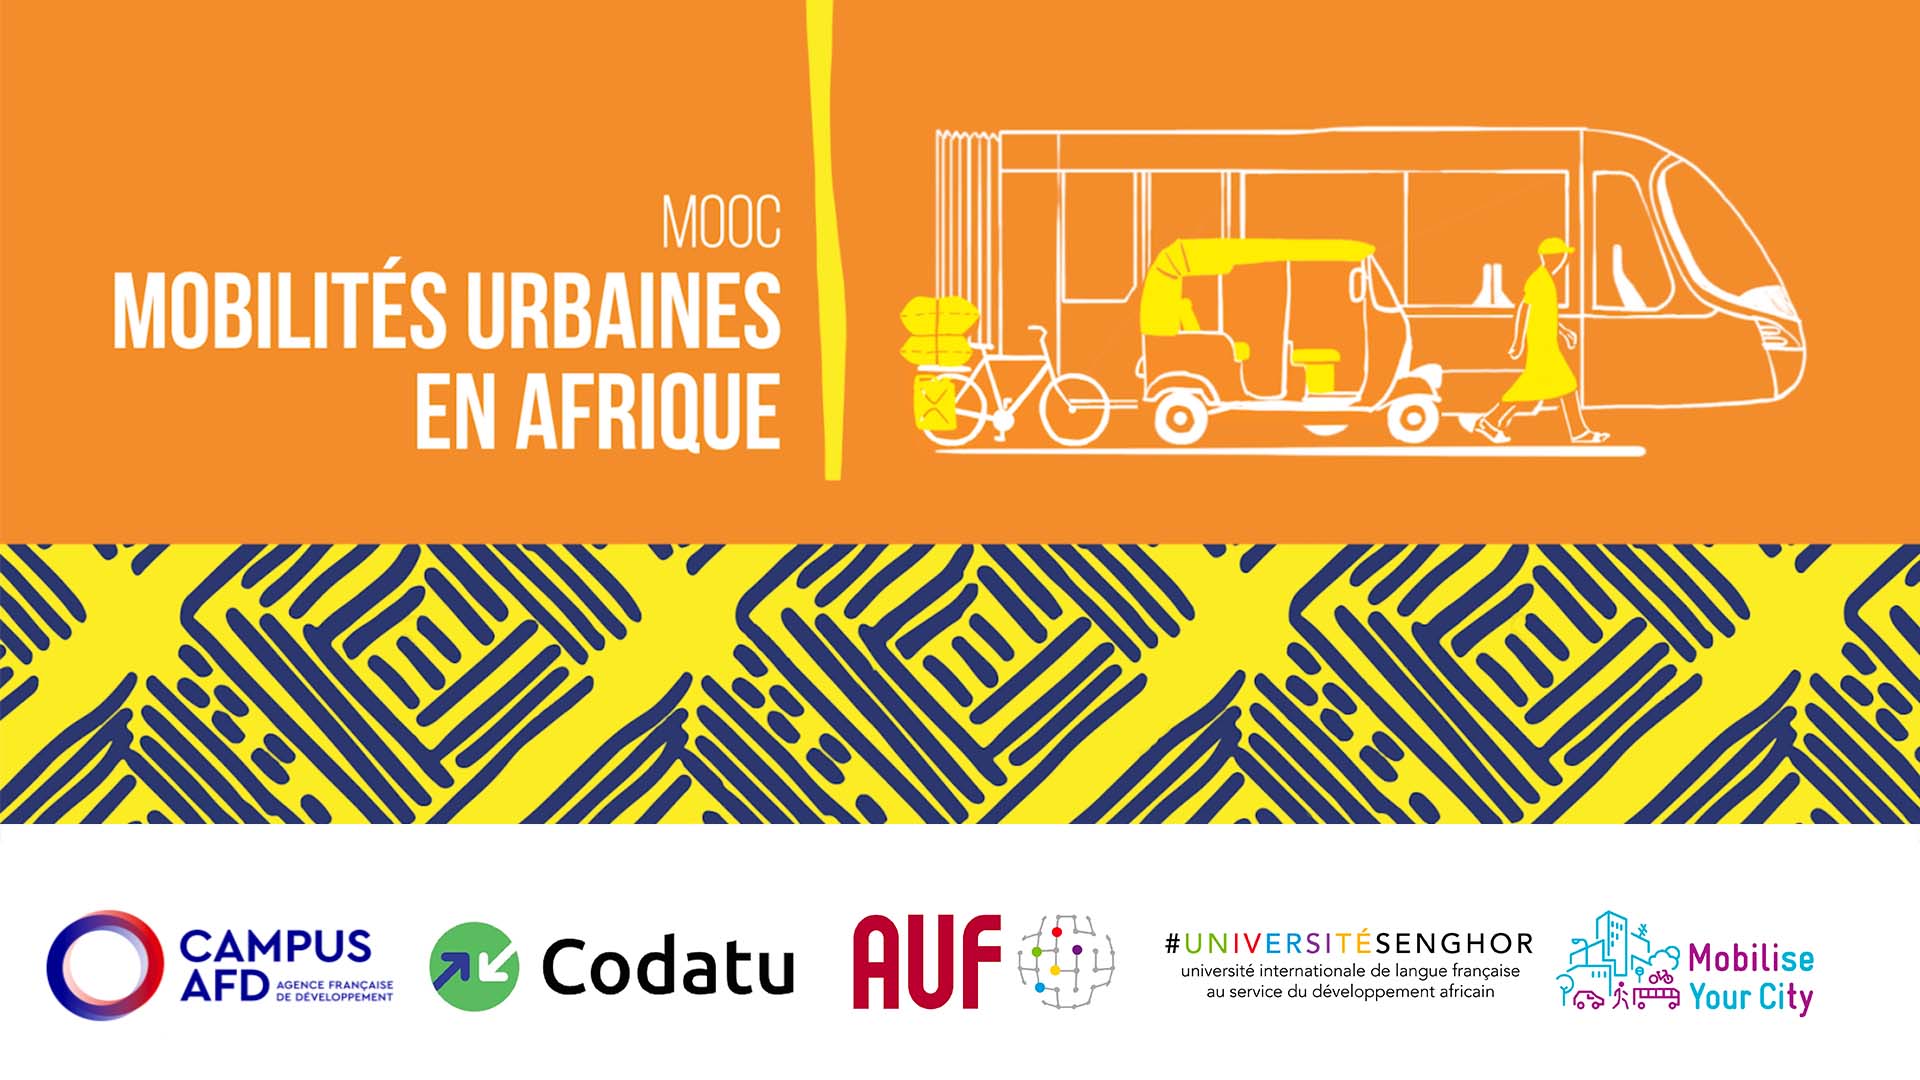 MOOC Urban Mobility in Africa